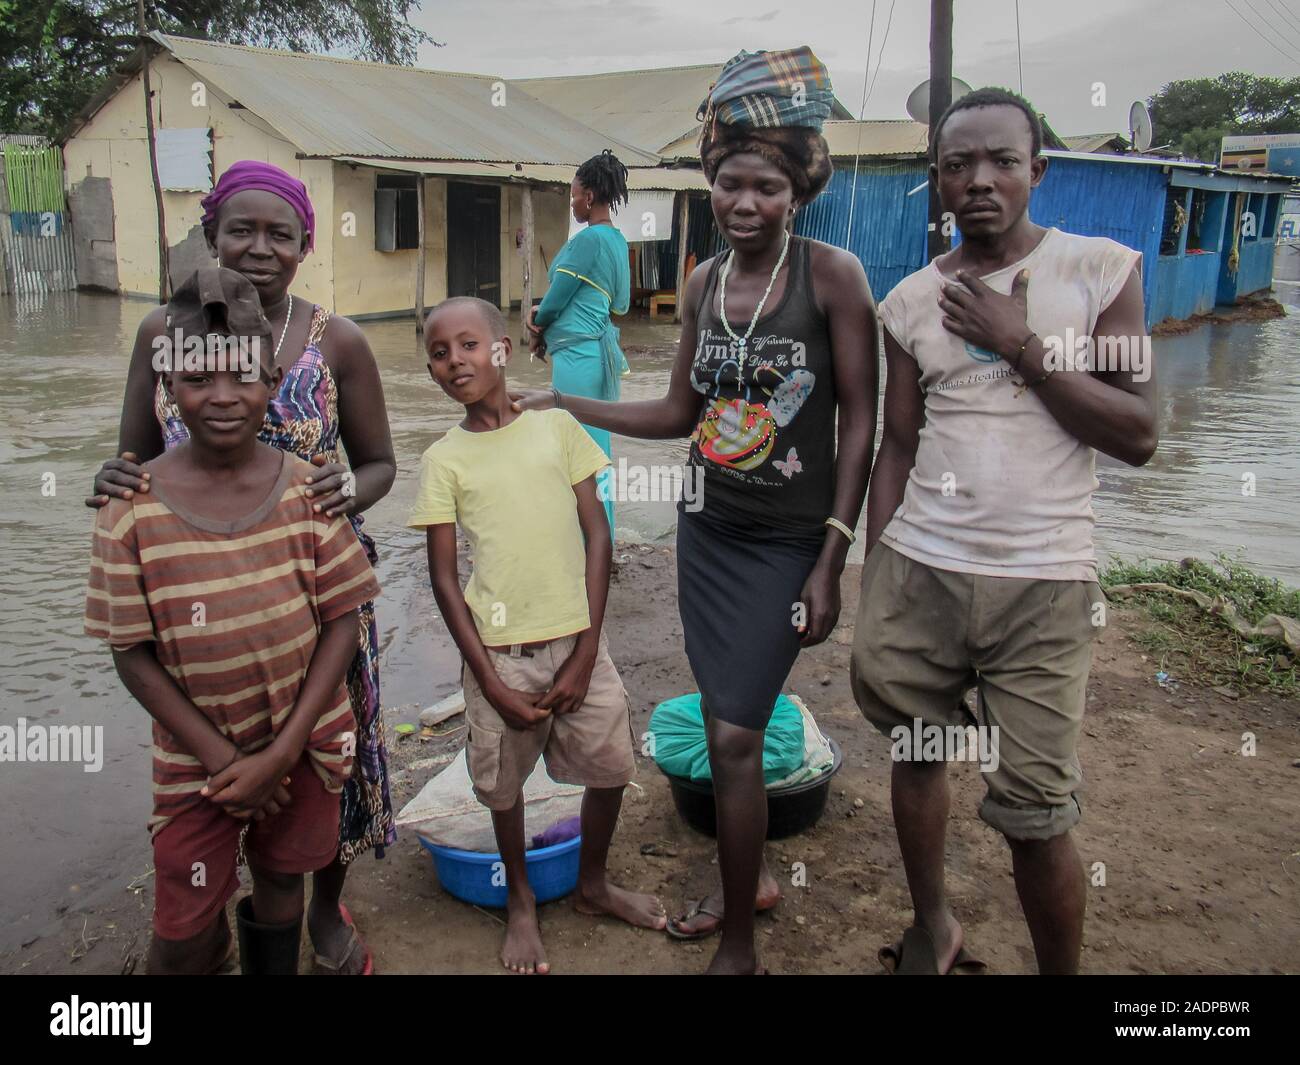 Akwero Beatrice, her sister Alaker and their children victims of the flood pose for a pic.Businesses and homes damaged by flooding in Elegu, northern Uganda, on the border with South Sudan. Thousands of people across East Africa are currently affected by flooding. Stock Photo